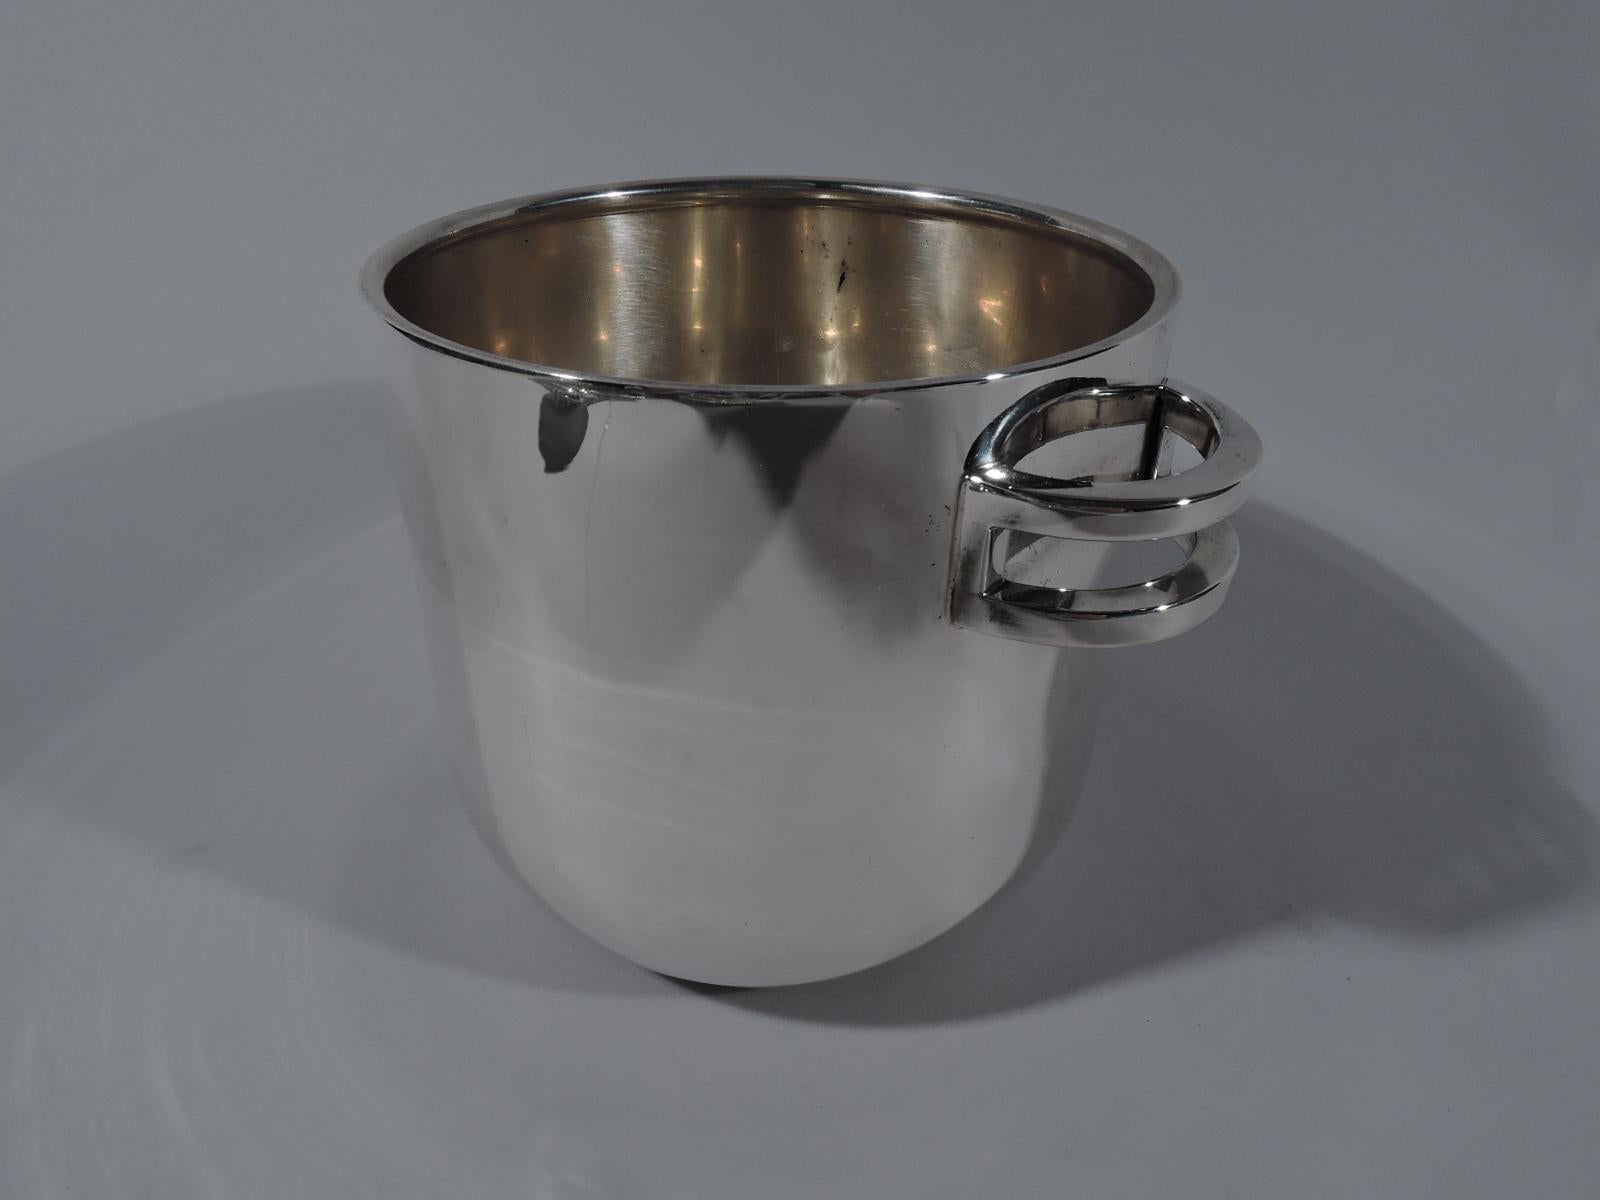 Modern Classical ice bucket. Retailed by Tiffany & Co. in New York. Urn with open double c-scroll side handles that hold the tongs. Marked “Tiffany & Co. Sterling / Italy”. Heavy weight: 23 troy ounces.